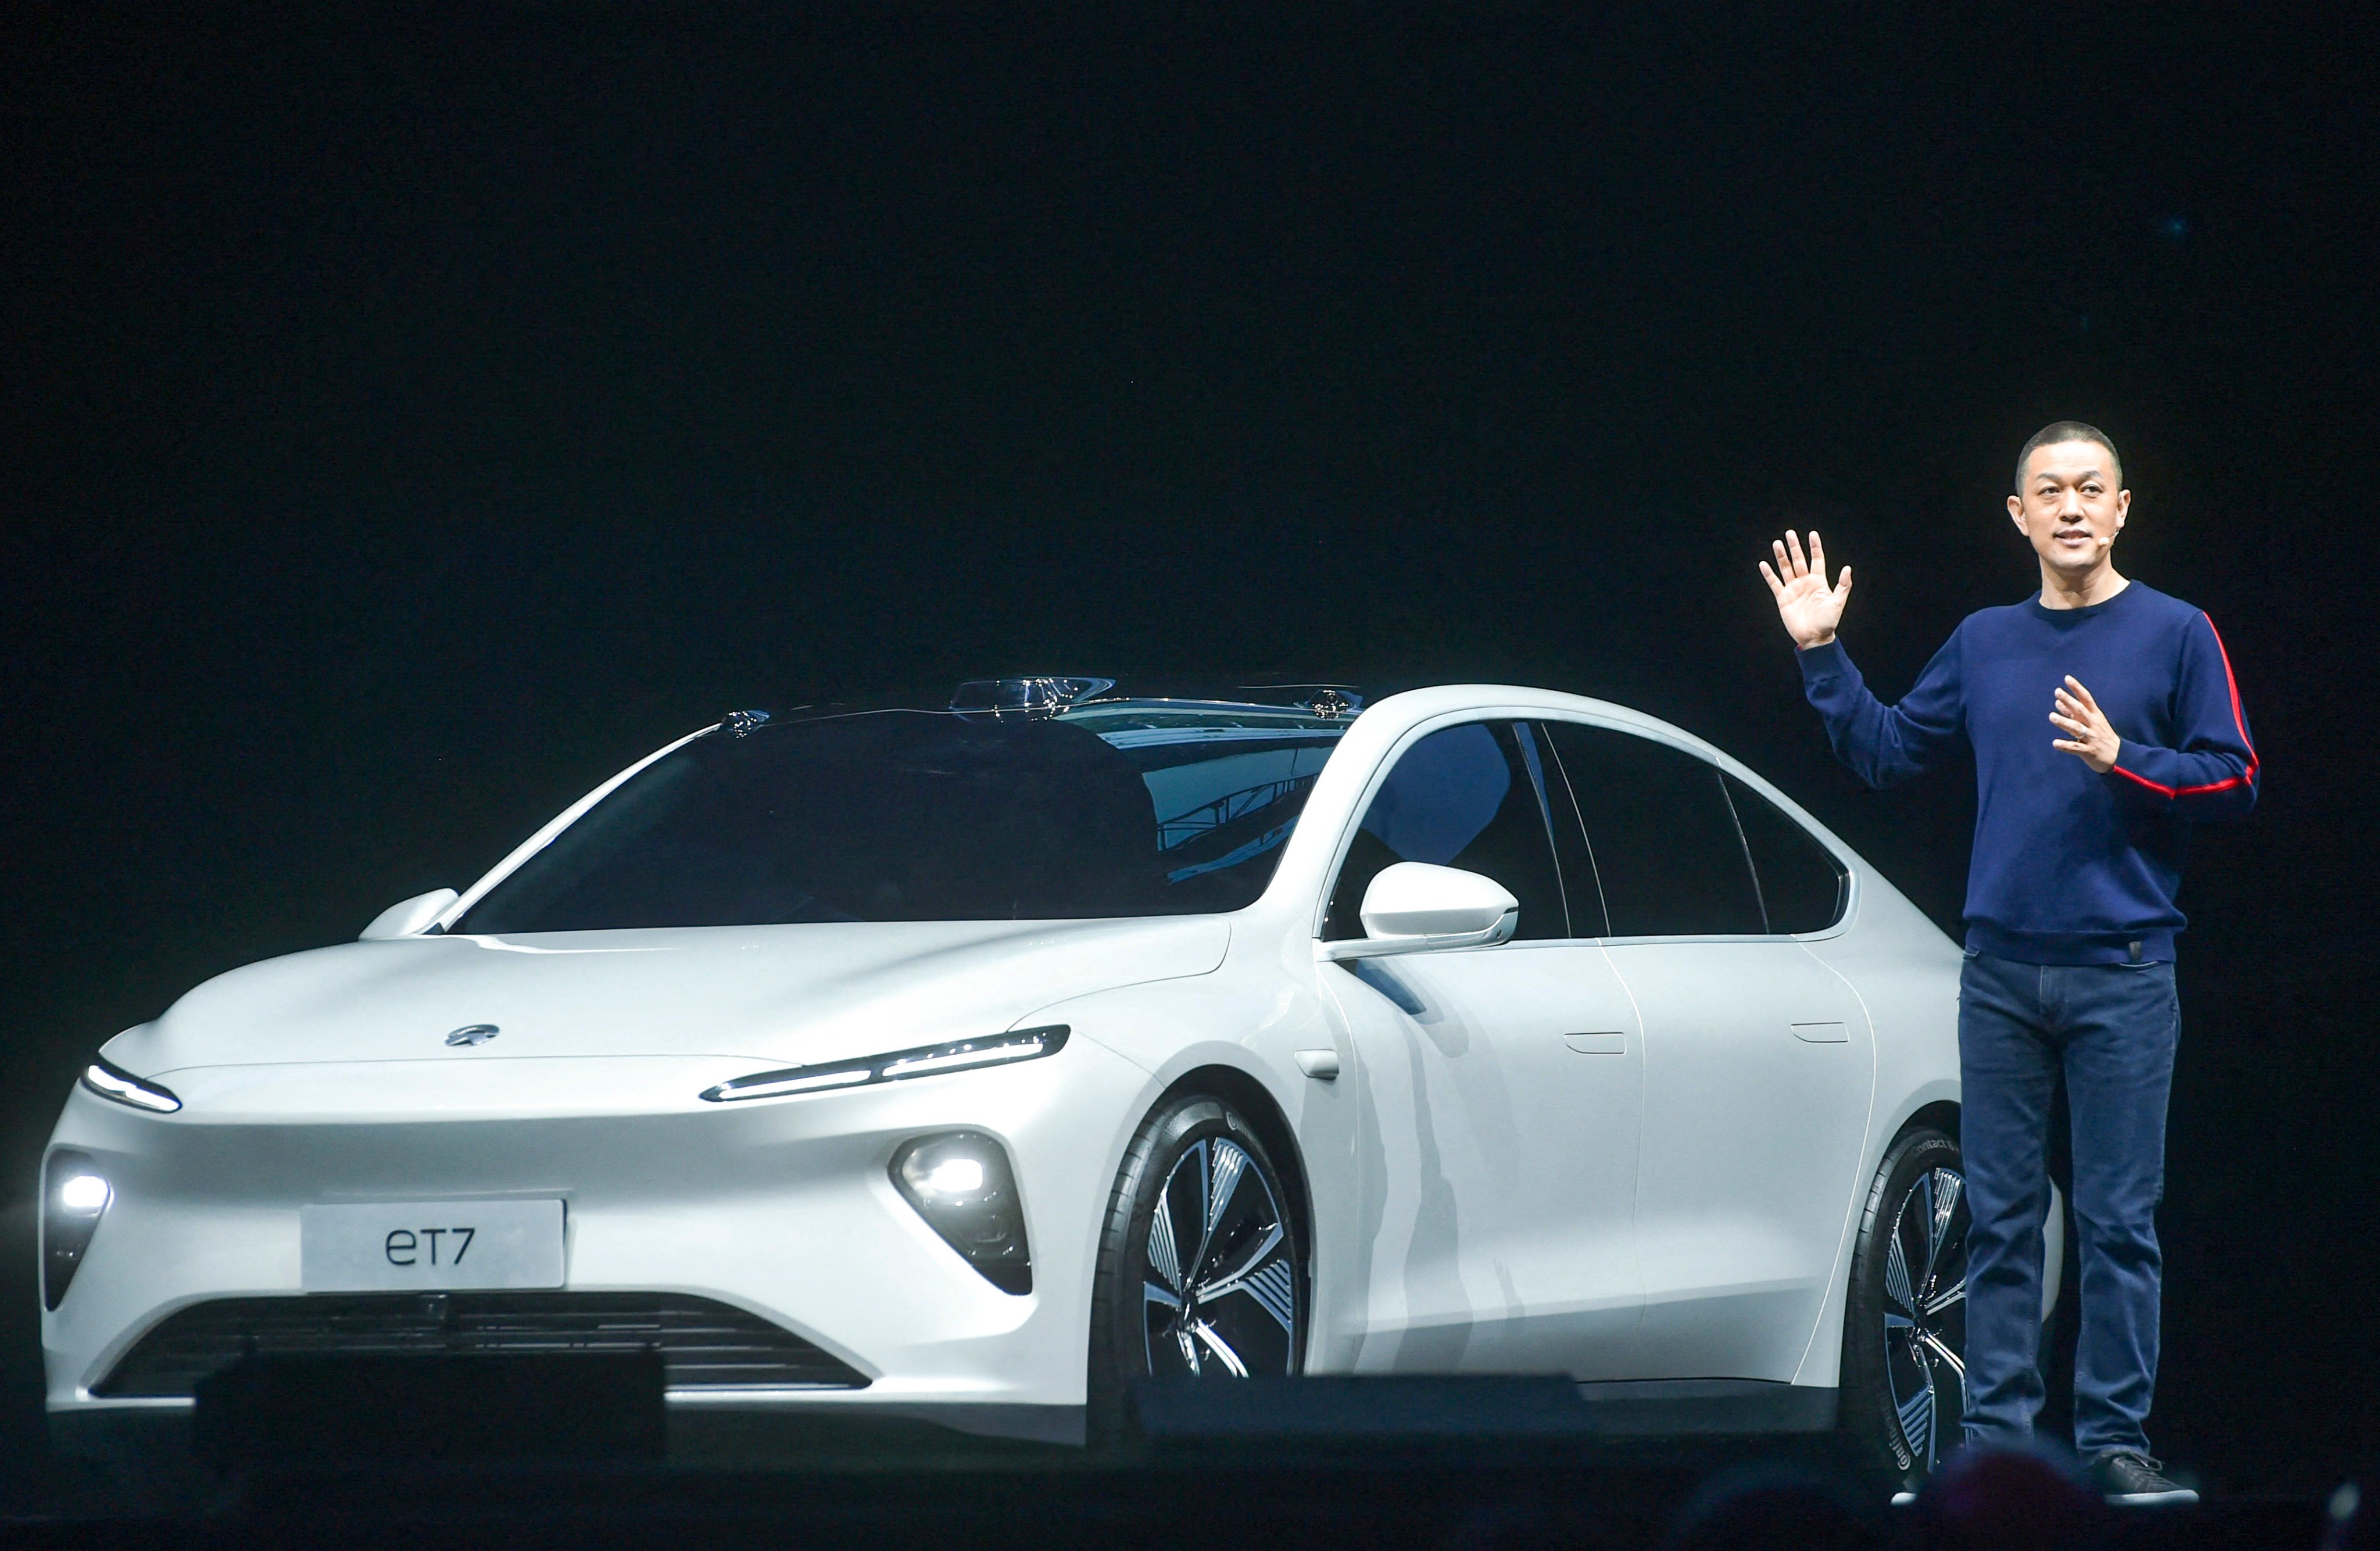 Nio CEO William Li introduces the ET7 sedan during its launch ceremony in Chengdu, in China’s southwest Sichuan province, in January 2021. Photo: AFP